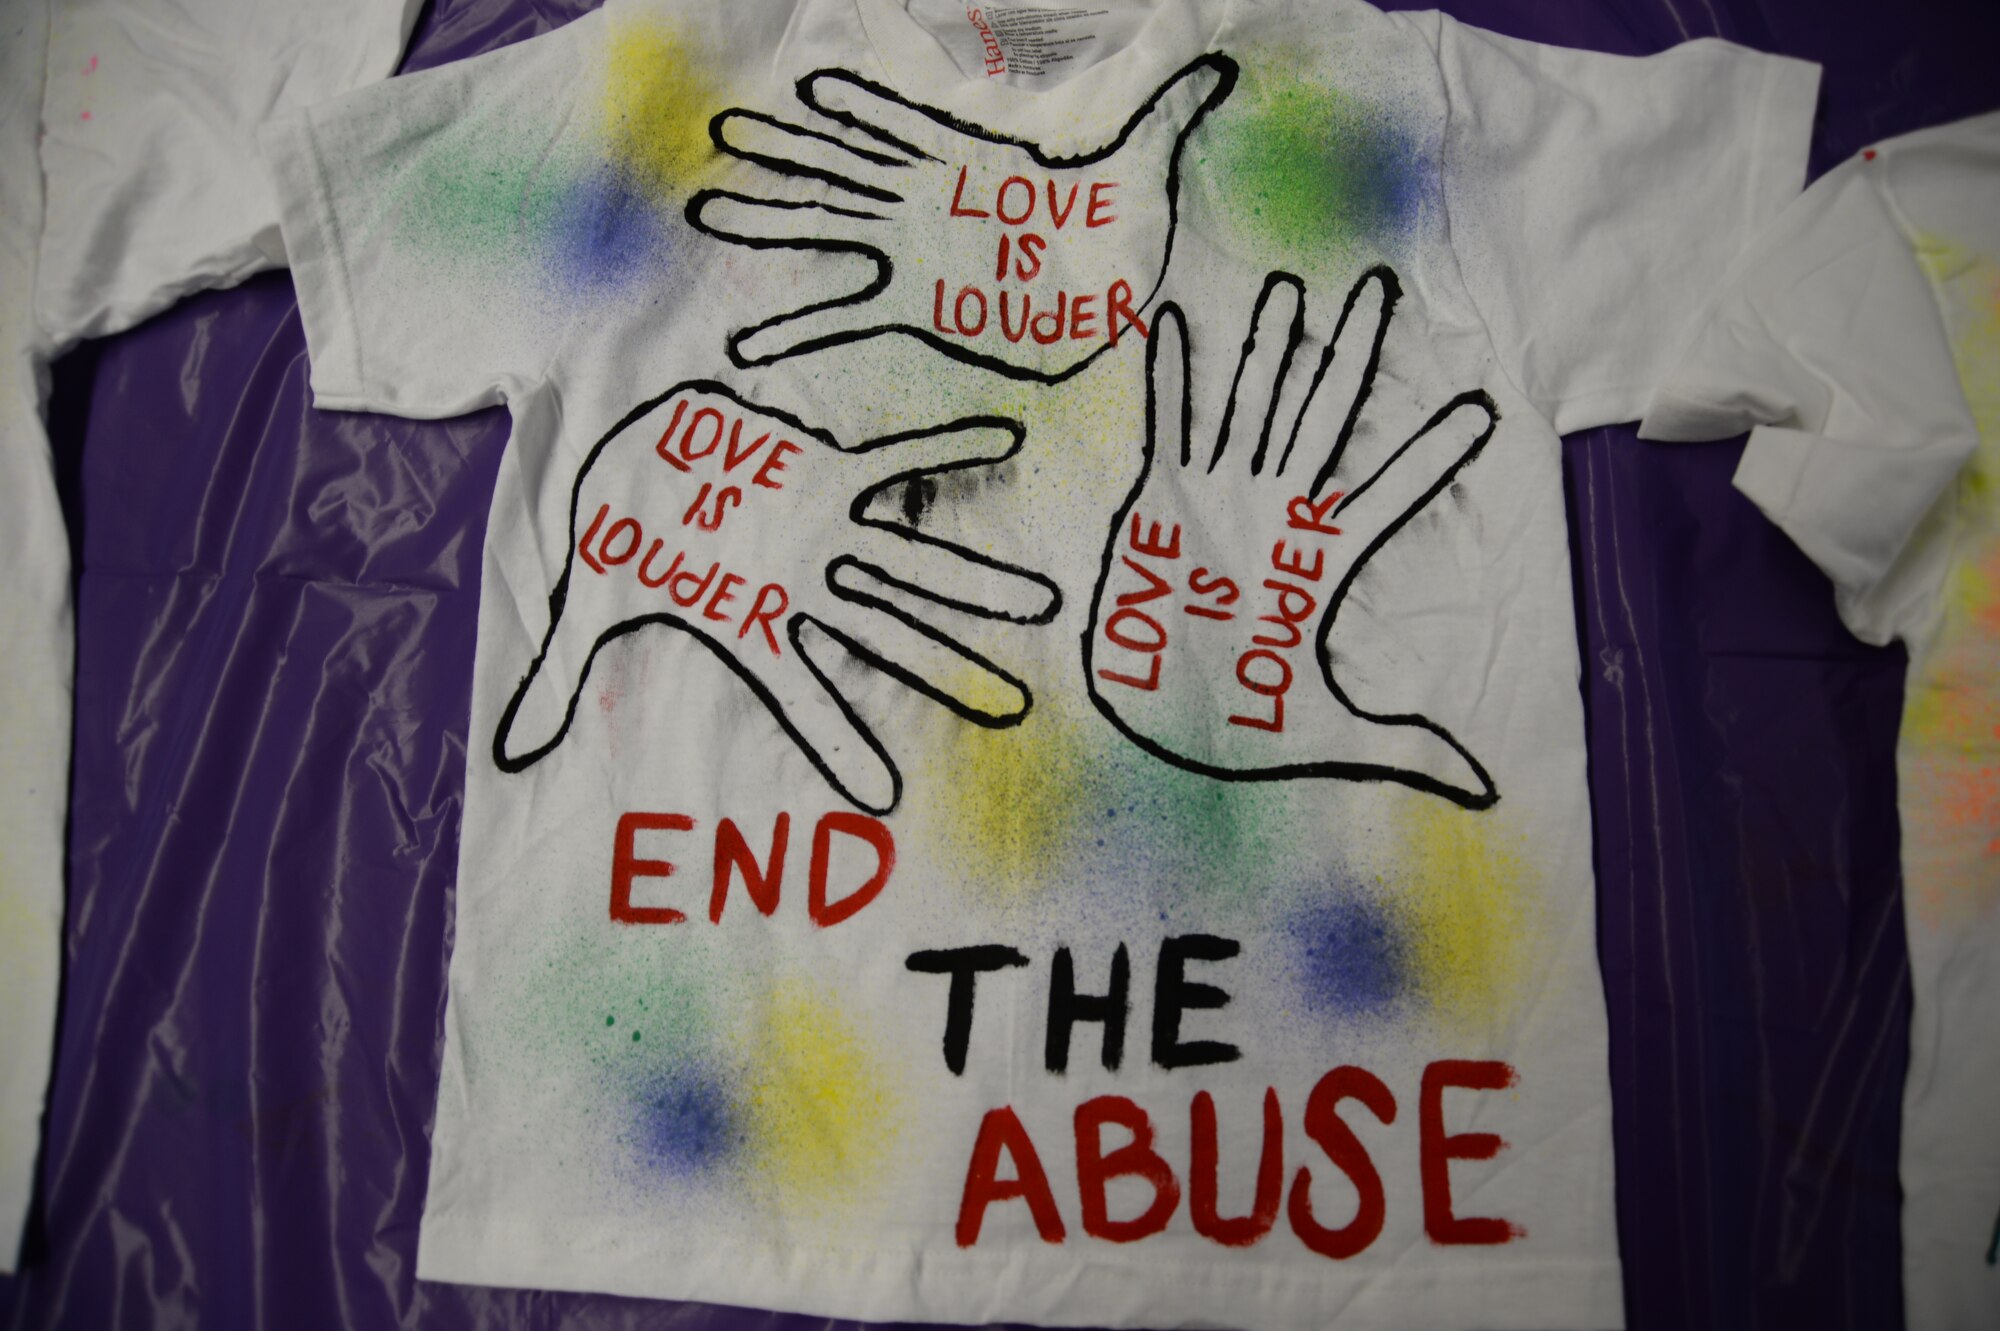 SPANGDAHLEM AIR BASE, Germany— A Saber team member displays a painted T-shirt with a message about domestic violence Oct. 17, 2013, for the Clothesline Project. This will be the eighth year the 52nd Medical Operations Squadron Family Advocacy office has put on this project, the T-shirt will be displayed along with many more Oct. 21-25 in front of the base post office to raise awareness of domestic violence. (U.S. Air Force photo by Airman 1st Class Dylan Nuckolls/Released)